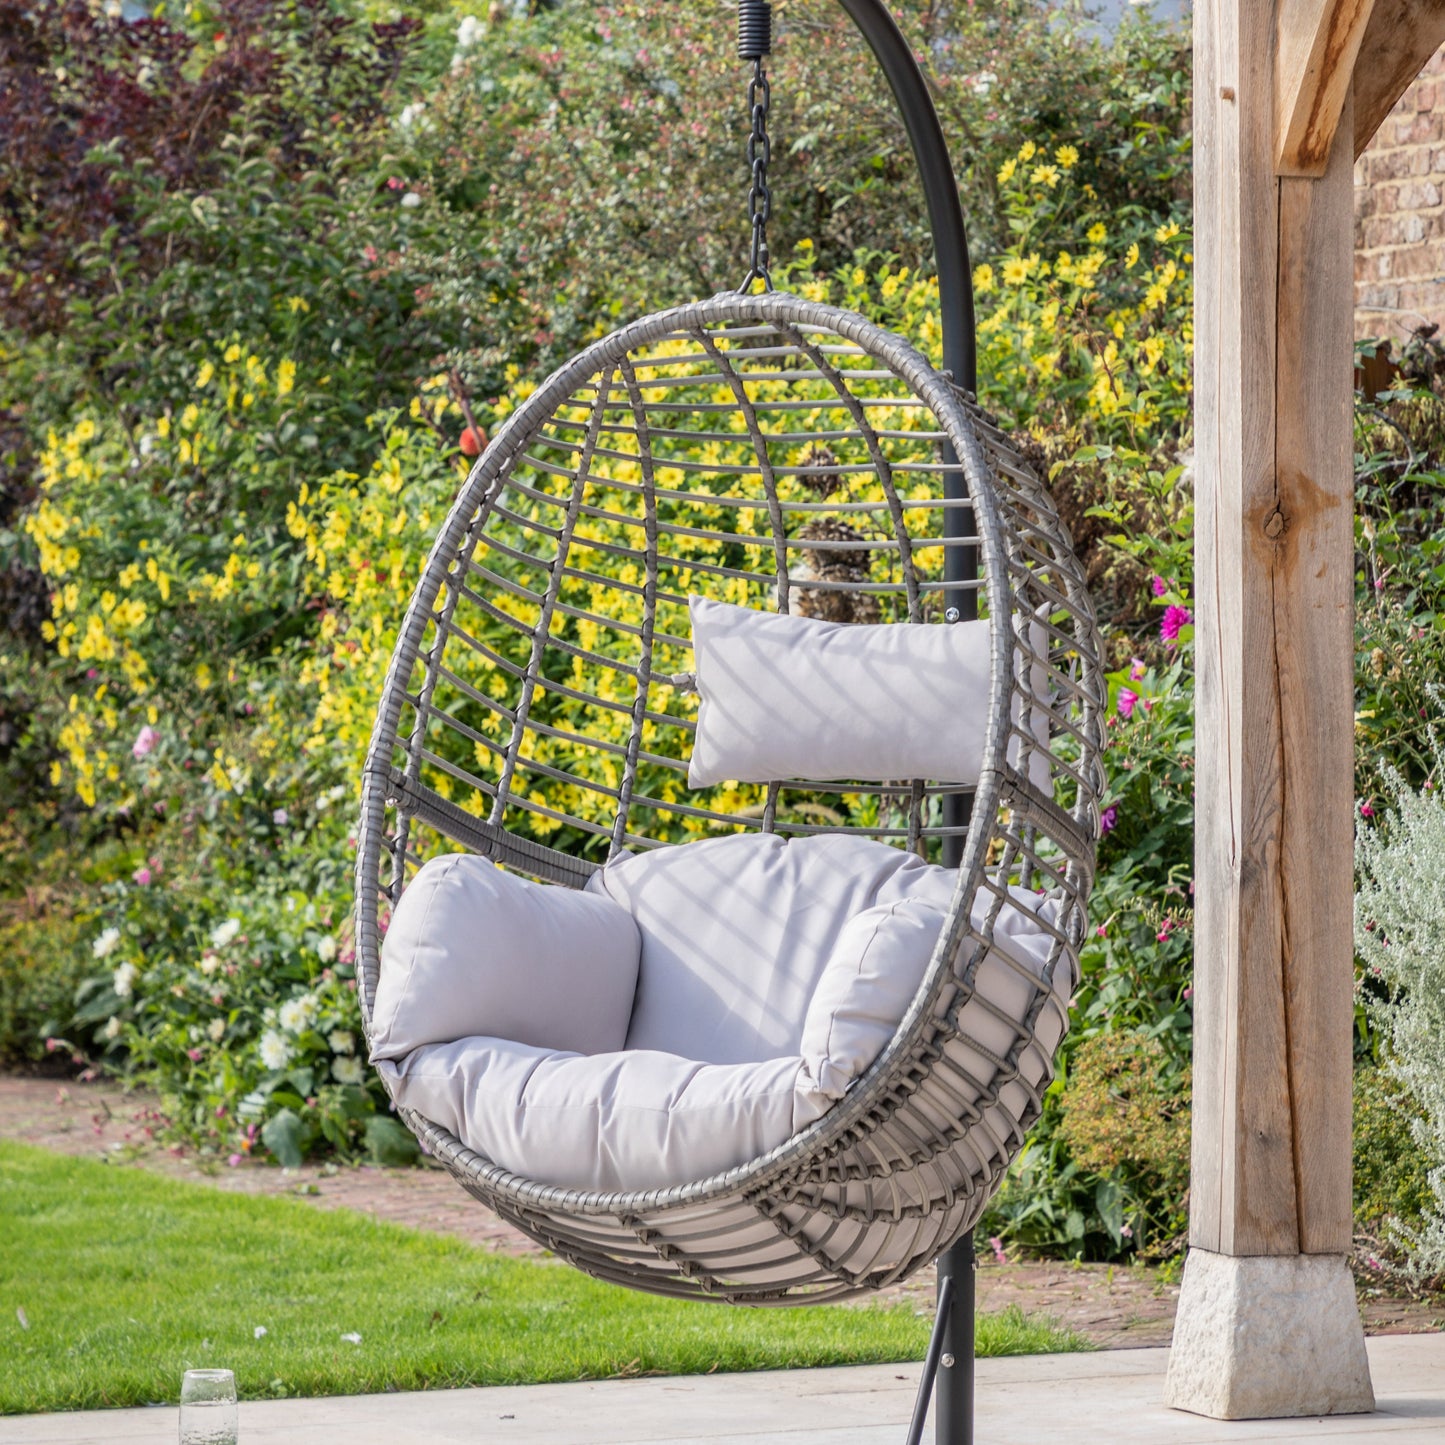 A Woodleigh Hanging Chair for interior decor in a garden from Kikiathome.co.uk.